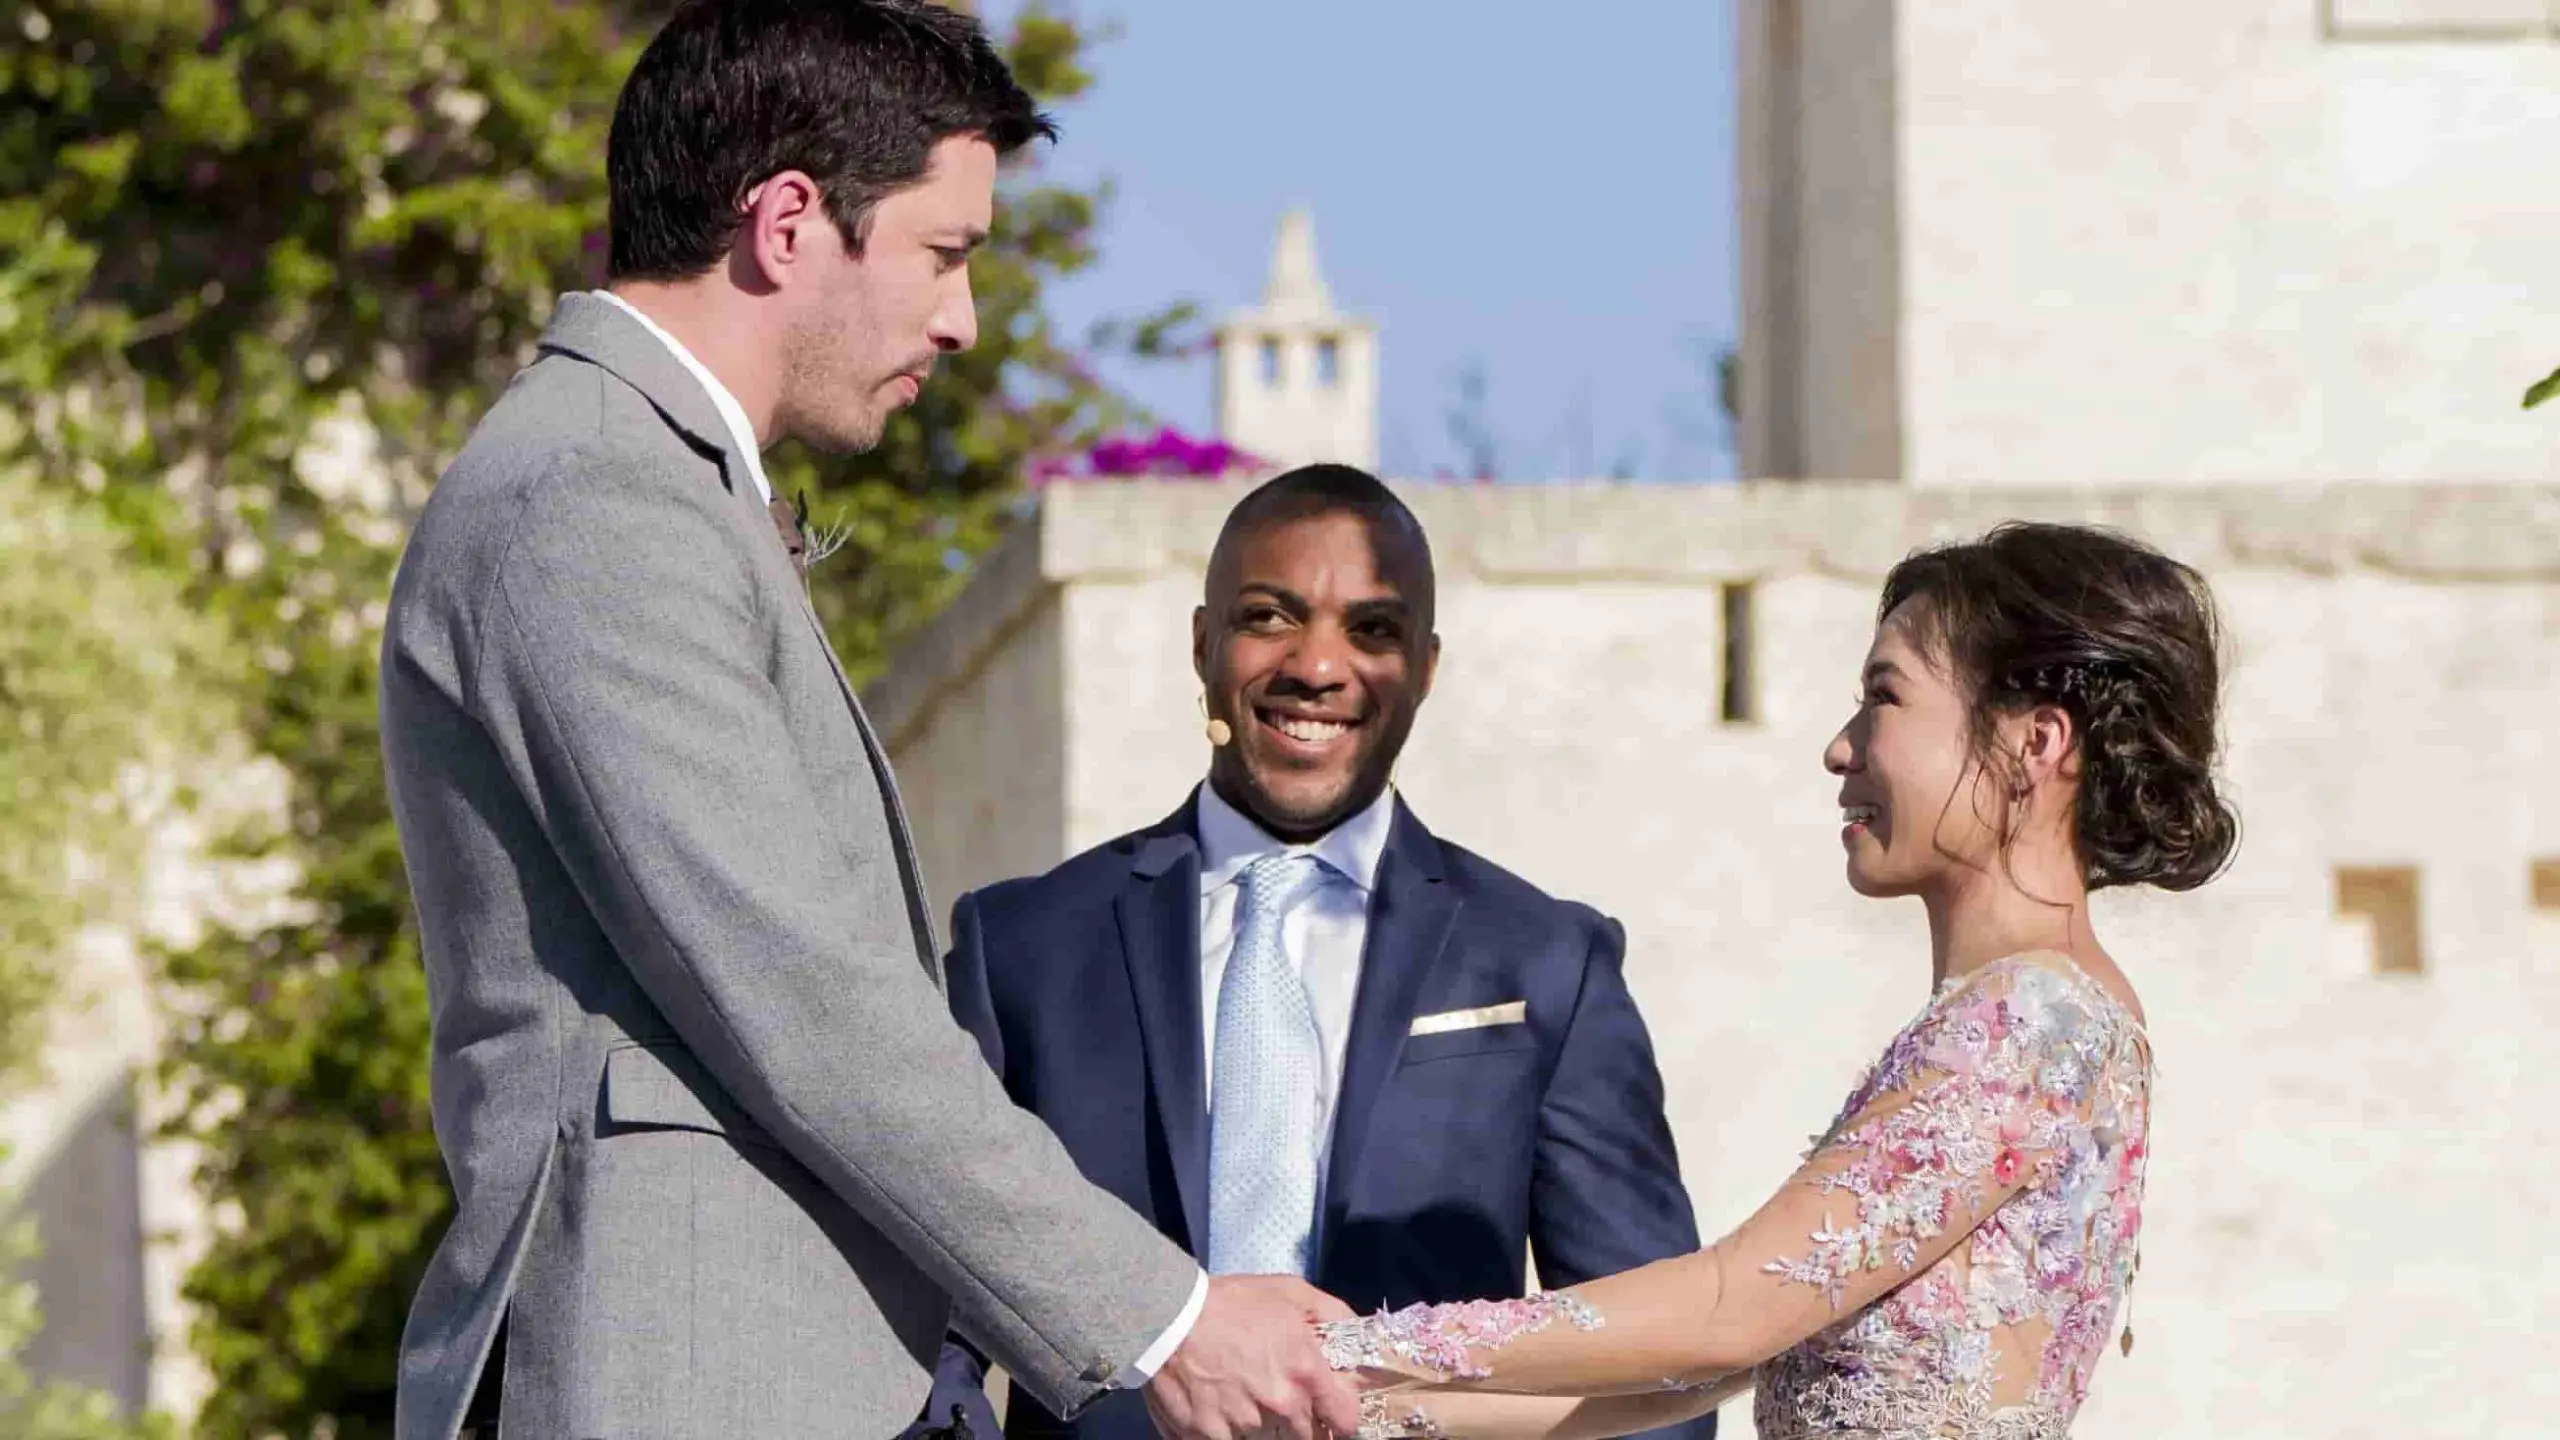  Image of Drew Scott with his wife, Linda Phan, on their wedding day